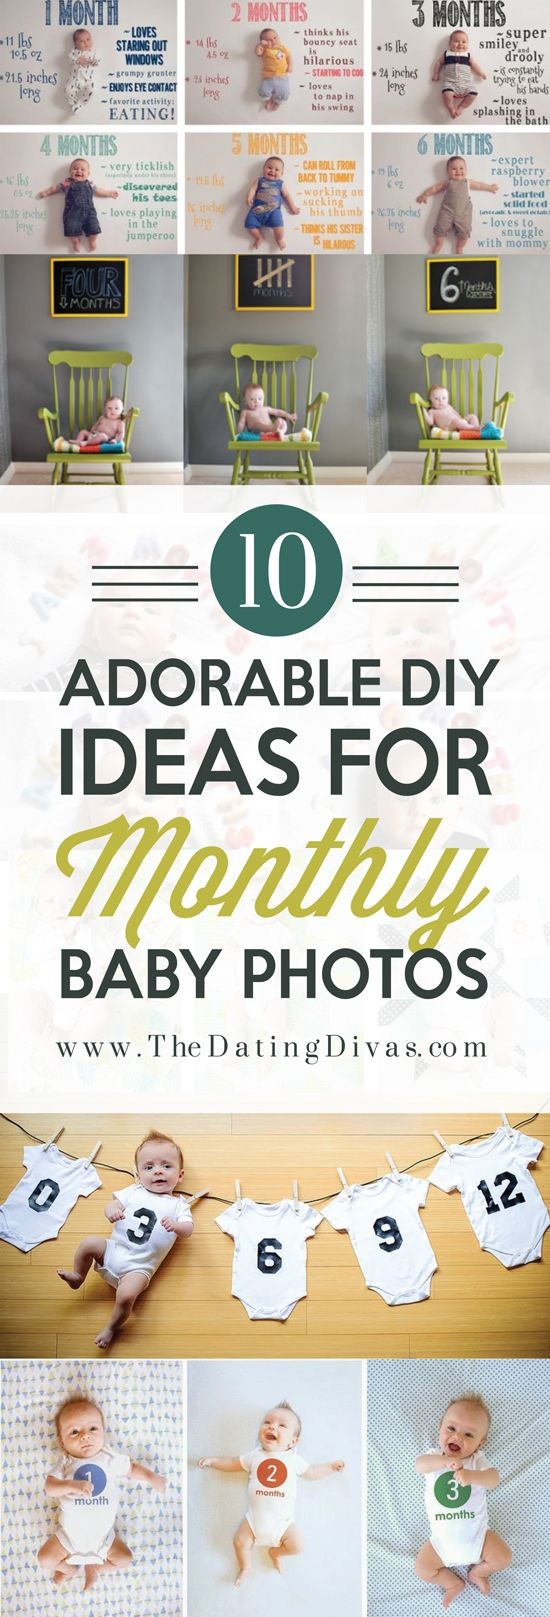 I LOVE these creative monthly baby pictures to doc...